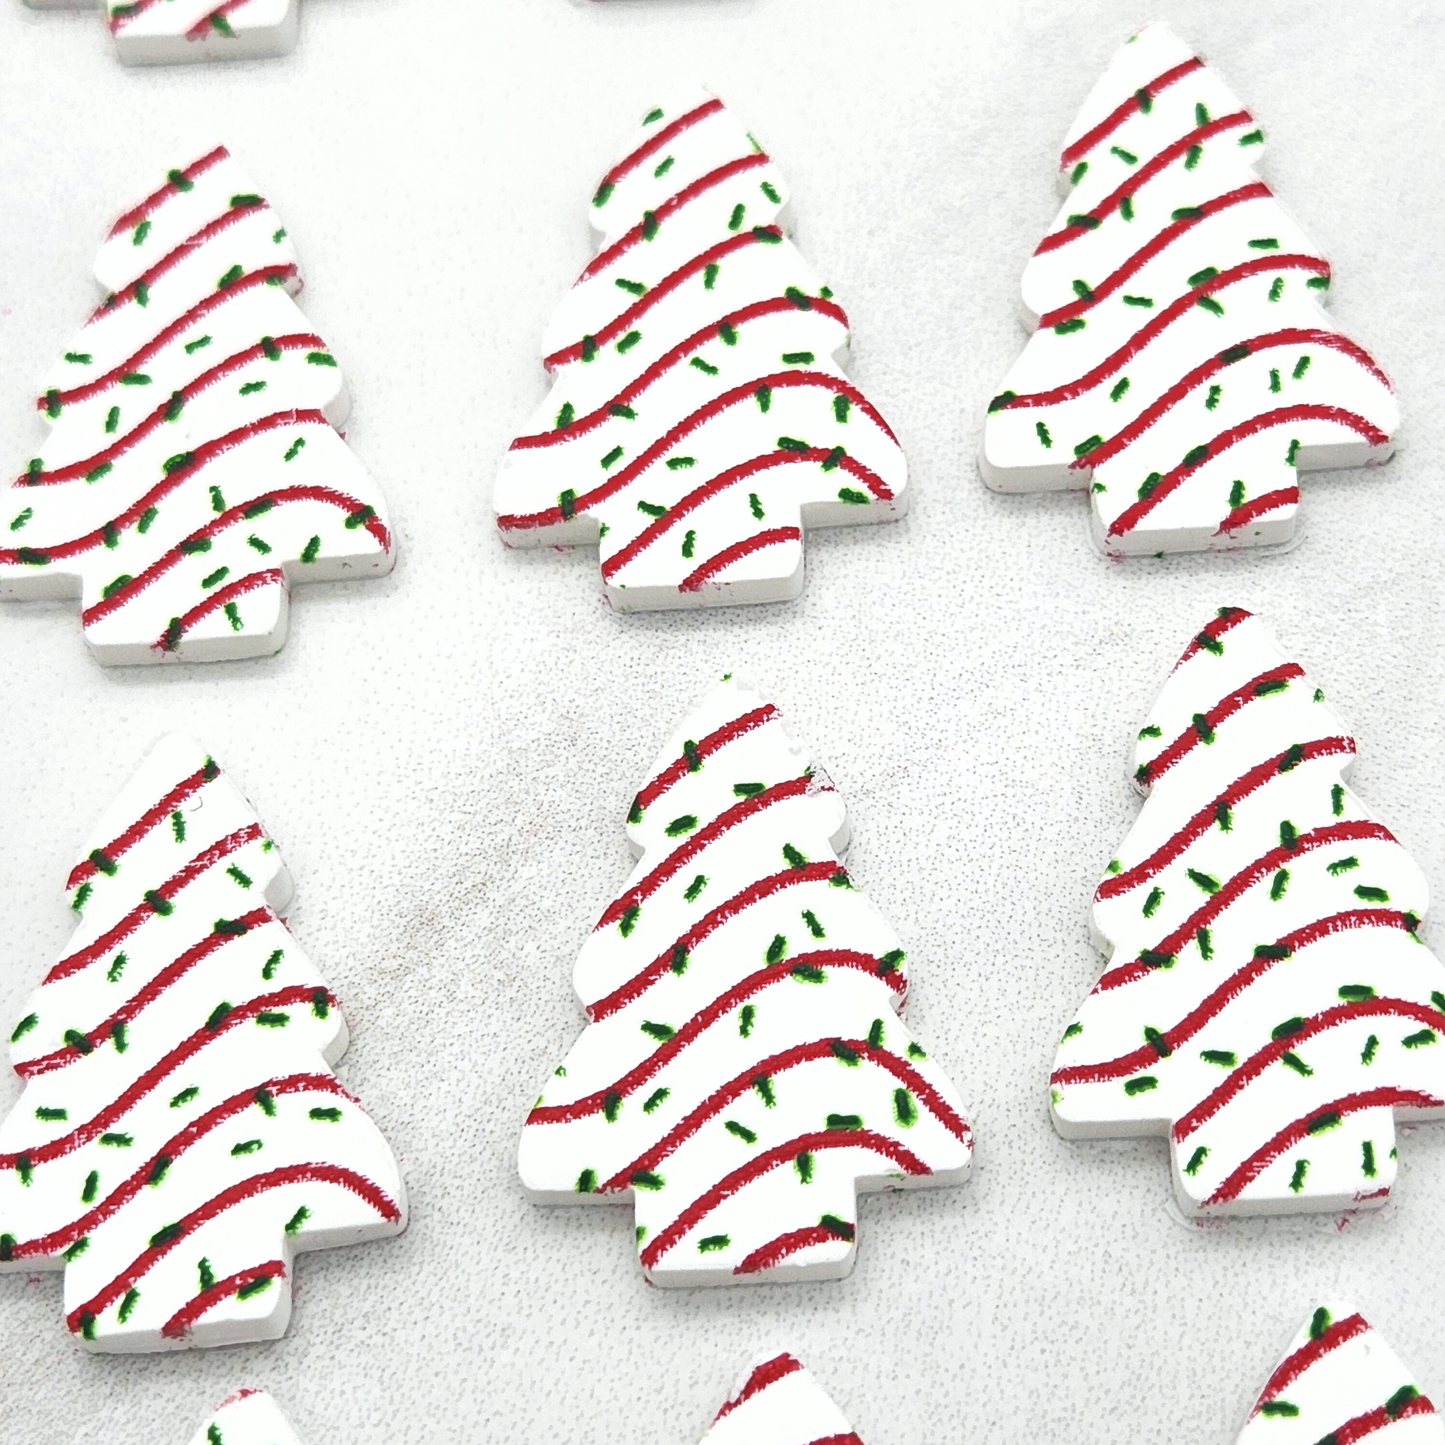 Christmas Tree Cakes, Candy Cane, Sprinkles Design for Polymer Clay